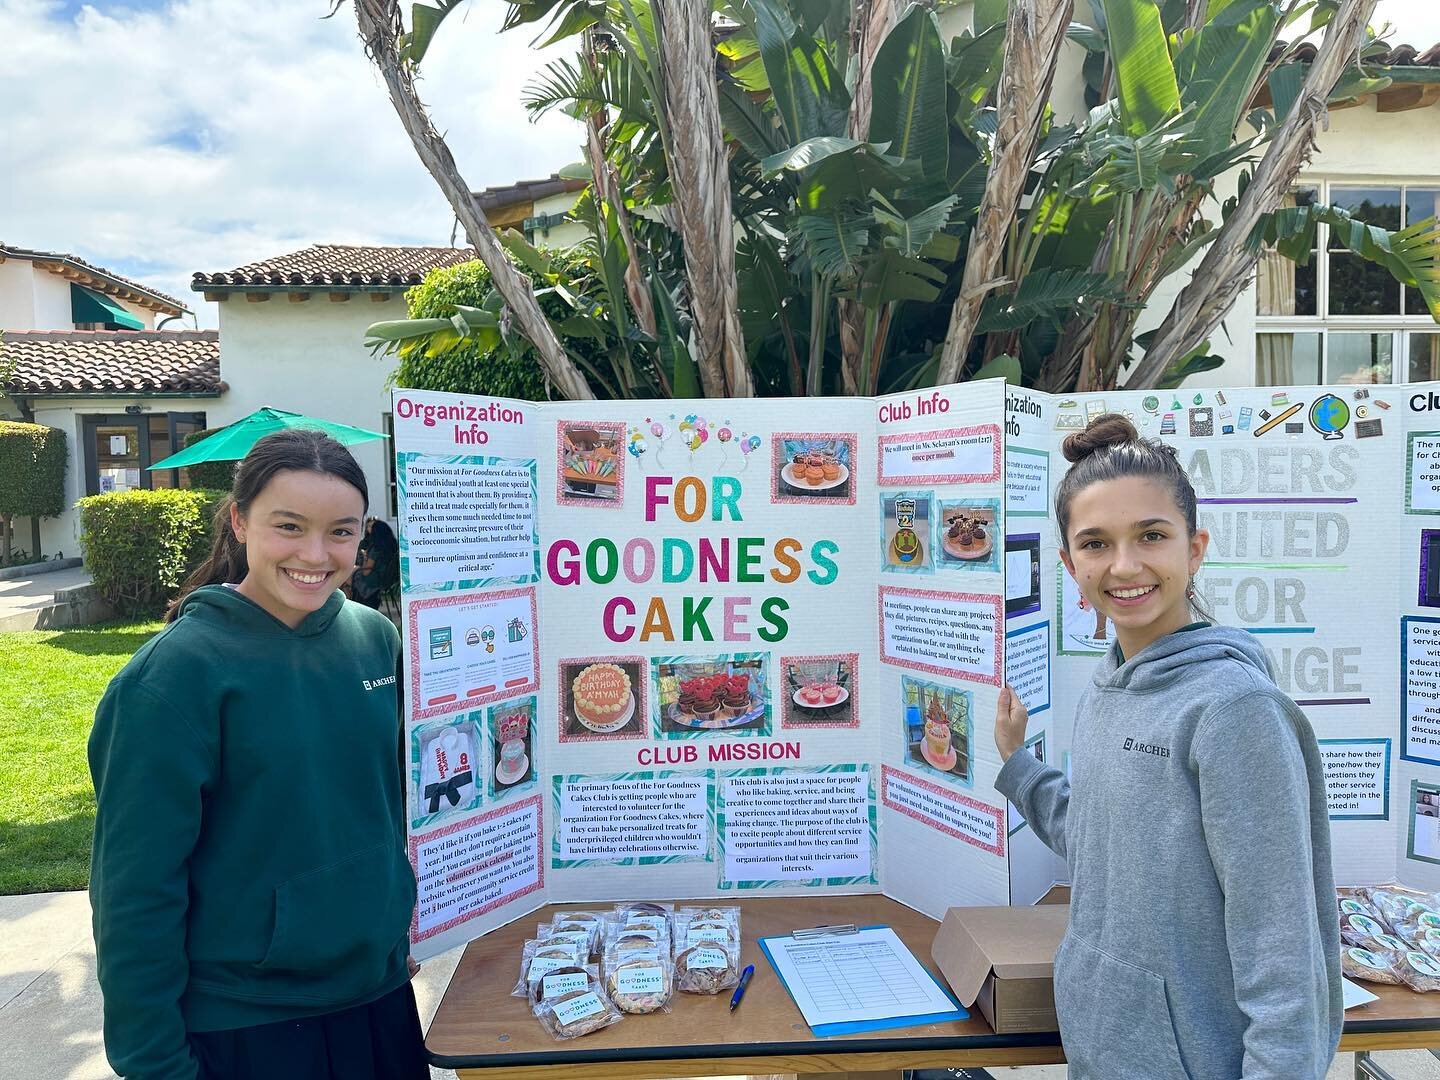 At Archer's annual Club Fair on Wednesday, we recruited a record number of For Goodness Cakes Club members across middle and upper school: 85! We're so excited to kick off our third year of the club! #forgoodnesscakes #baking #forgoodnesscakesla #clu